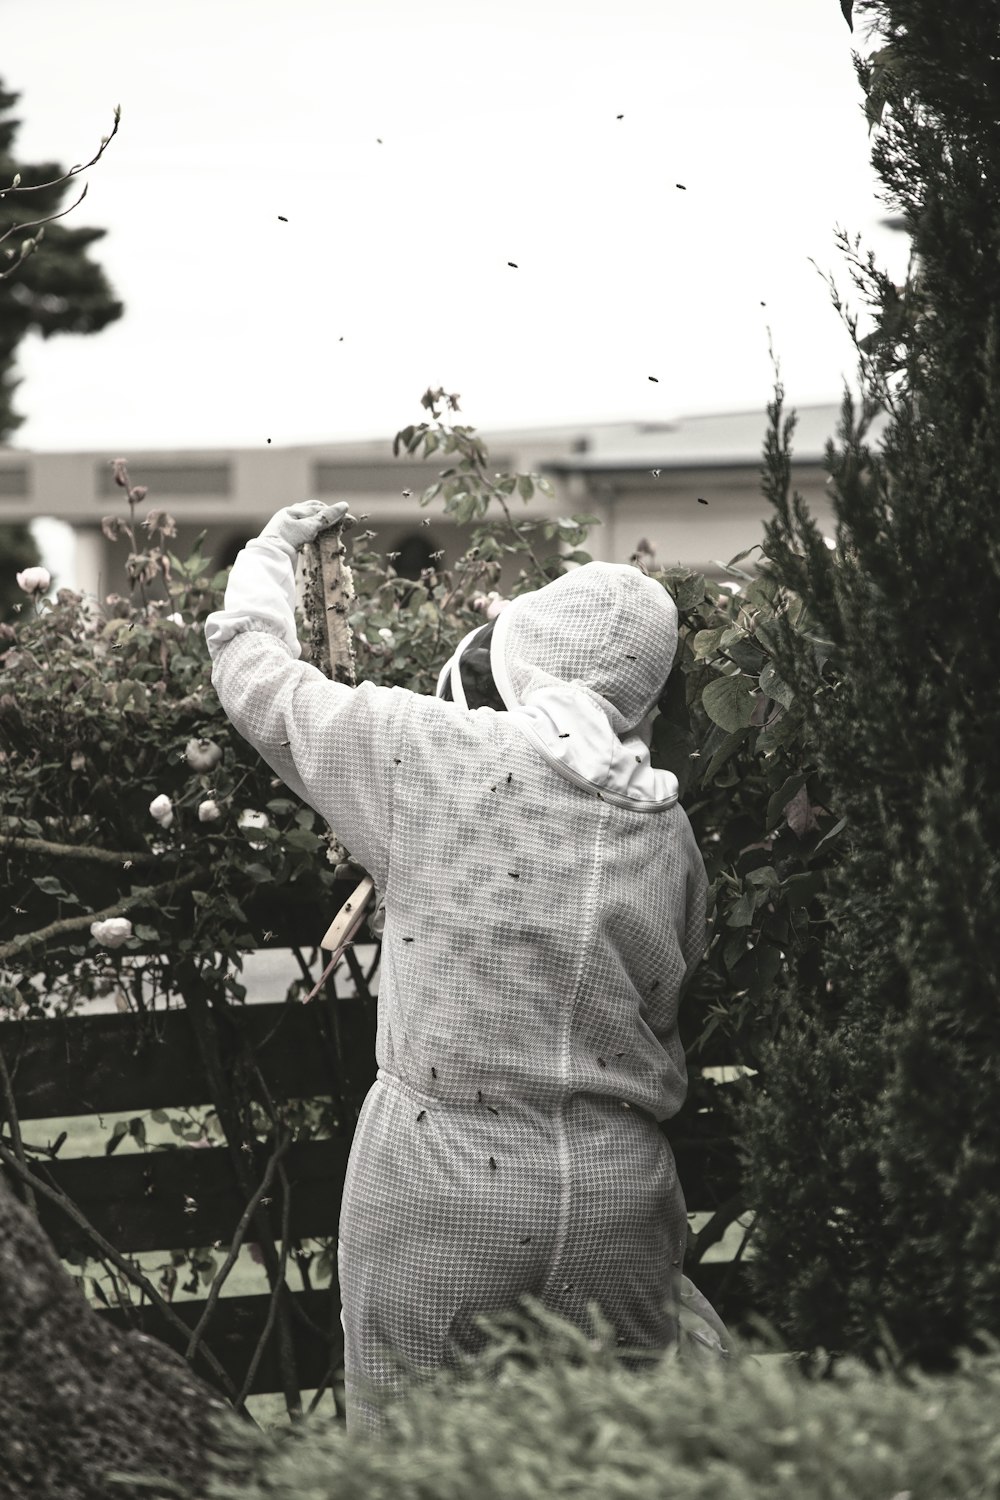 grayscale photo of person standing beside plant with swarm of bees